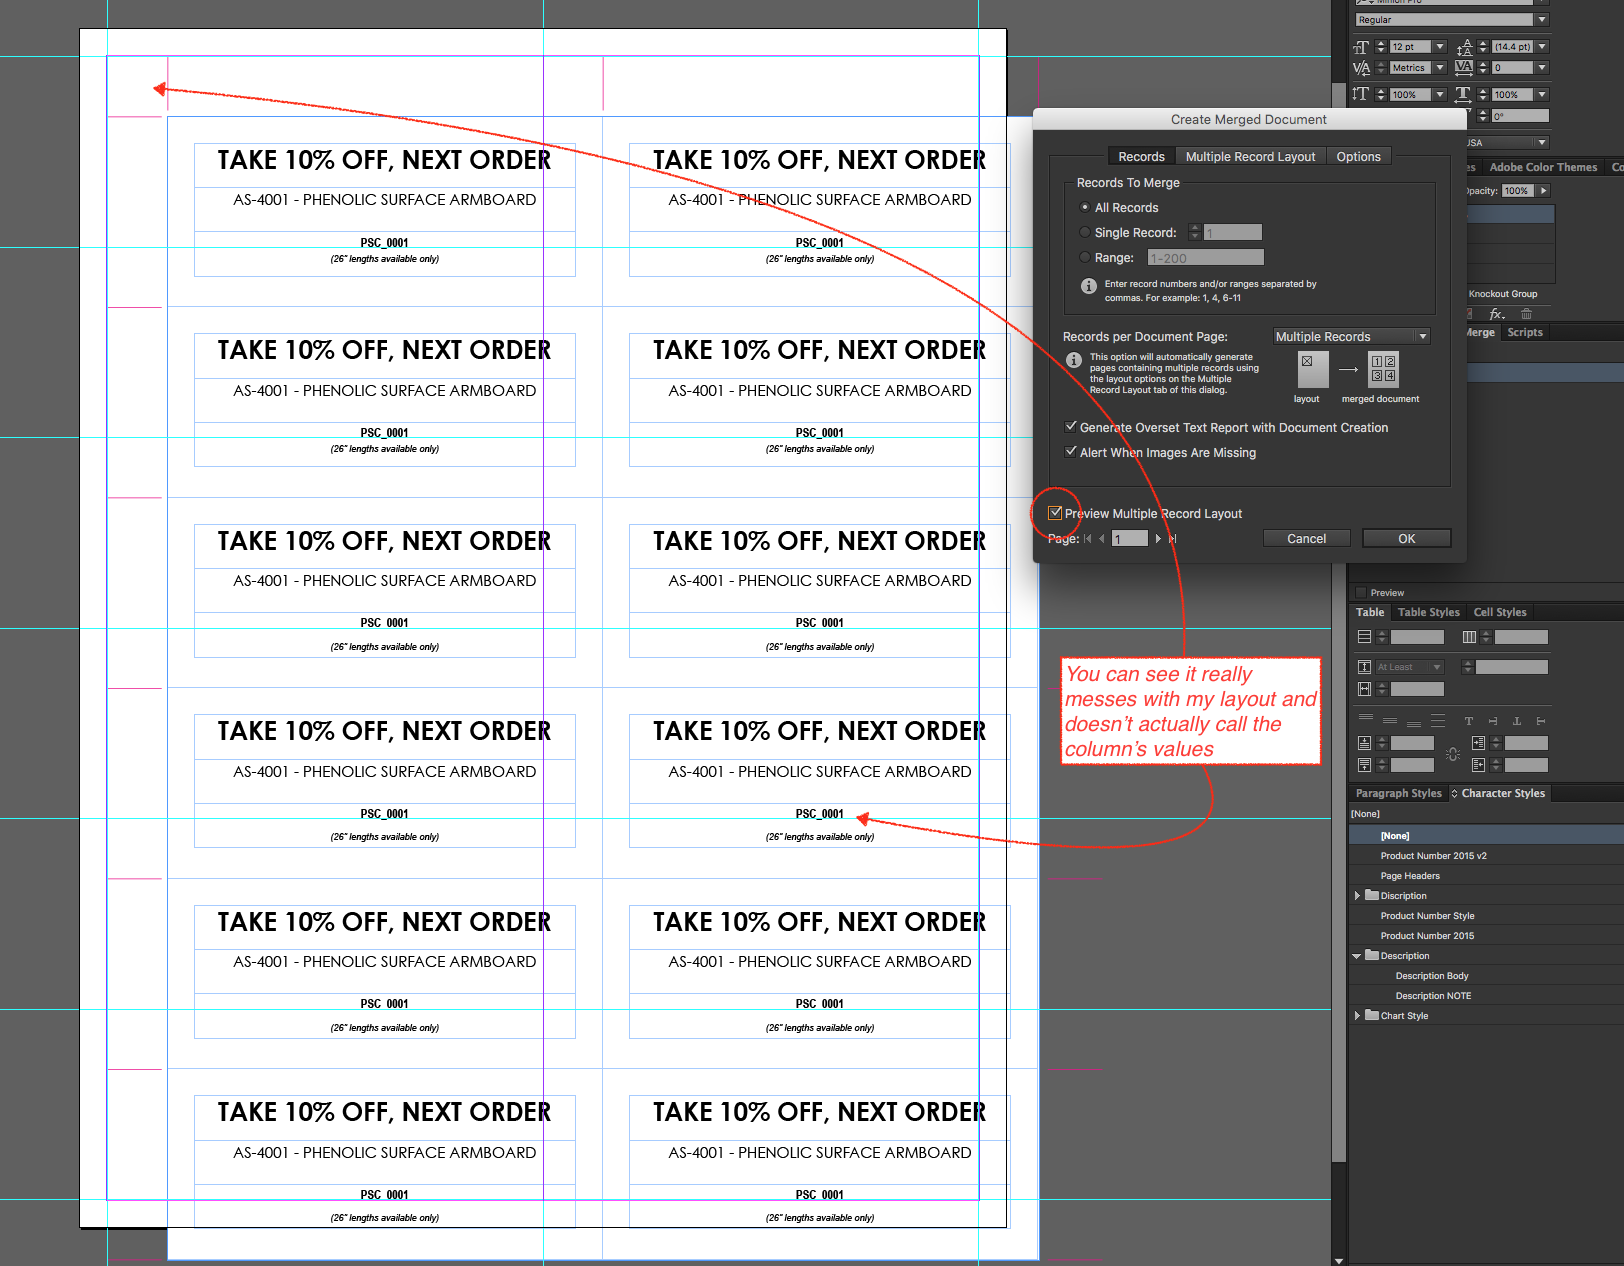 indesign data merge multiple records per page